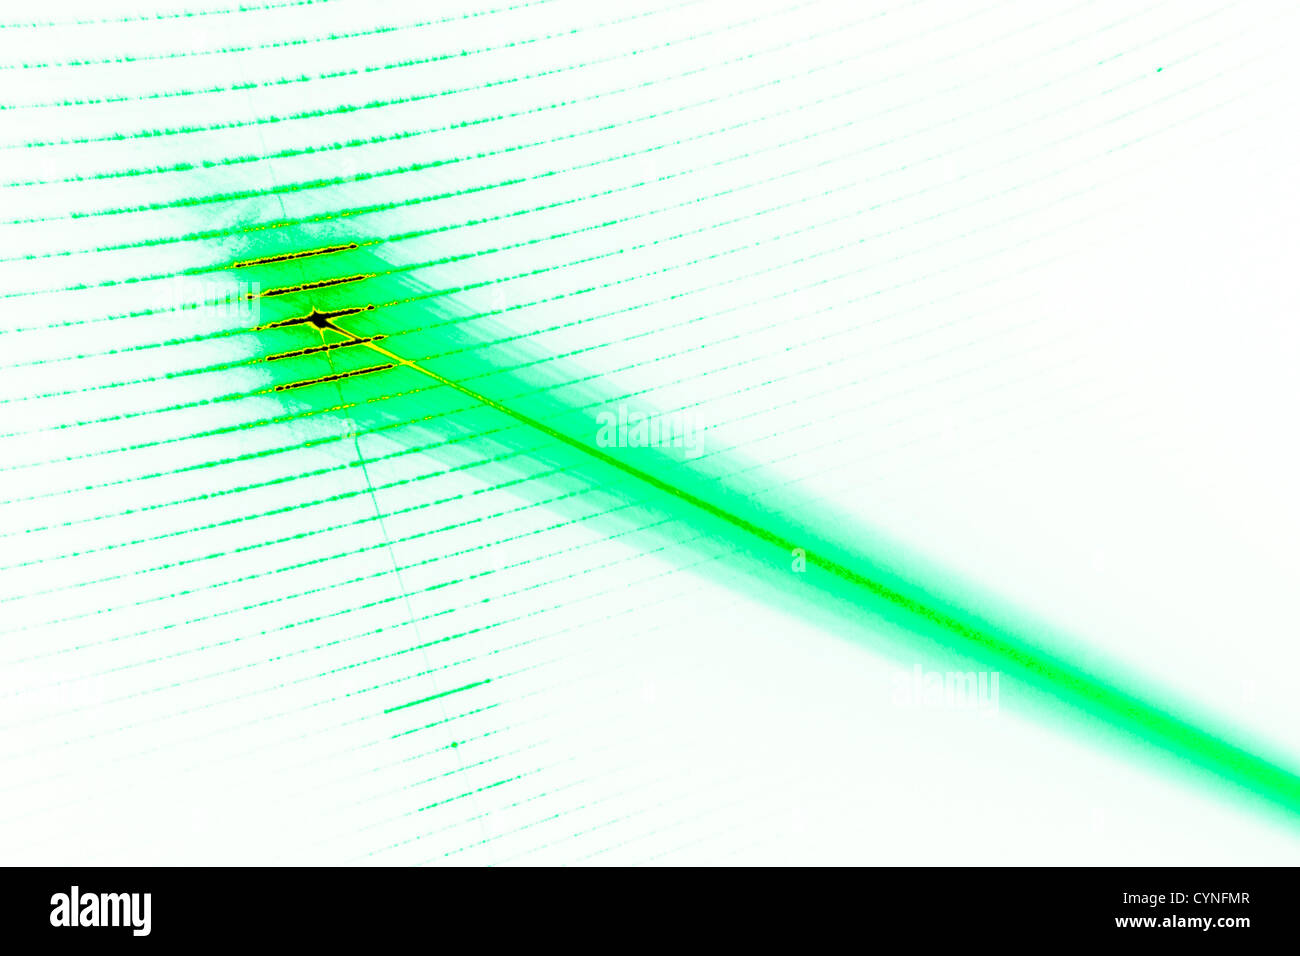 Diffraction. Laser beam after passing through a diffractive pattern generator. Digitally manipulated. Stock Photo